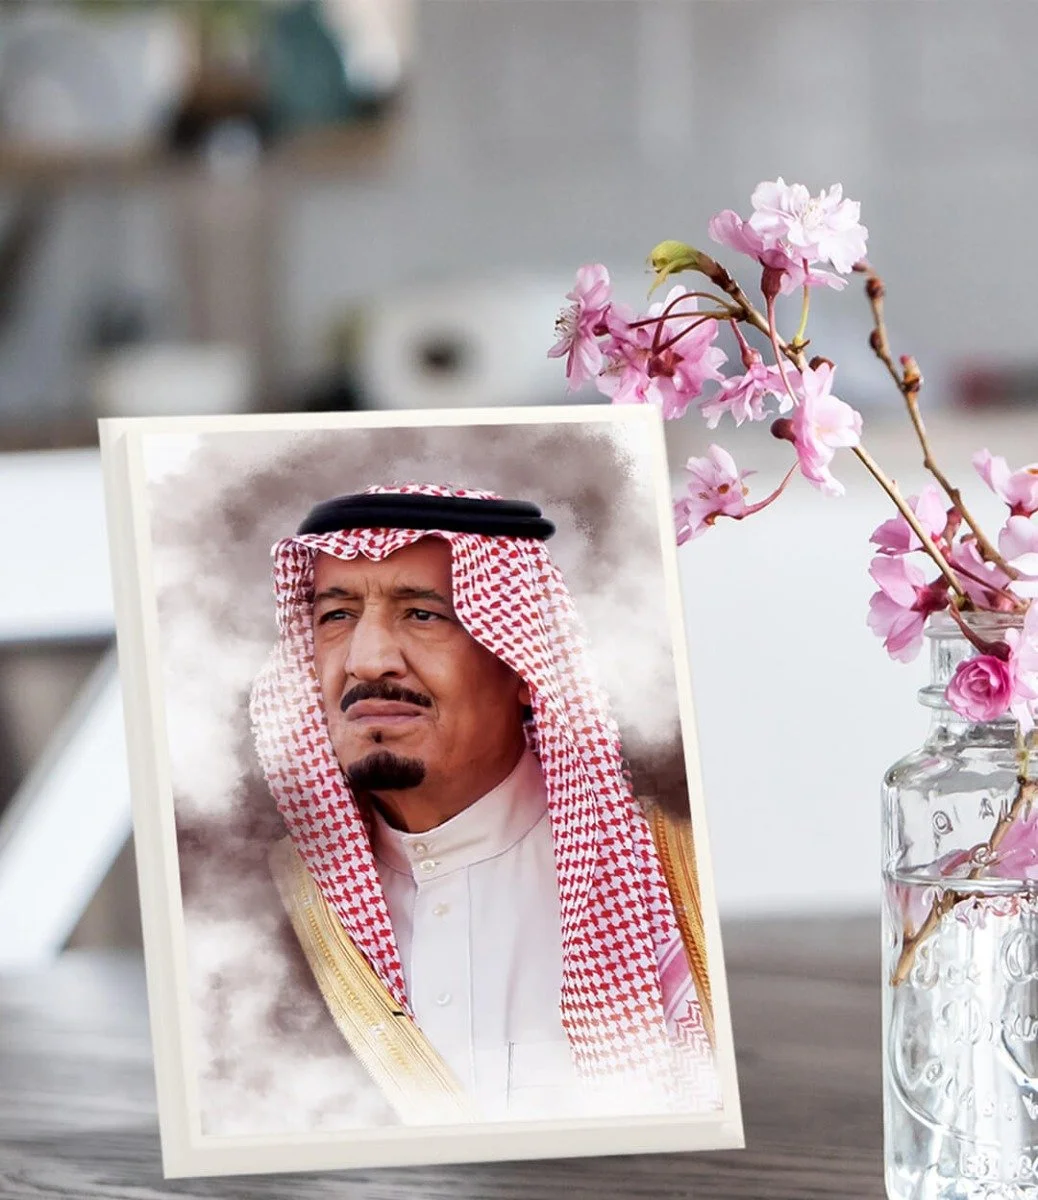 Wooden Plaque With the Portrait of King Salman